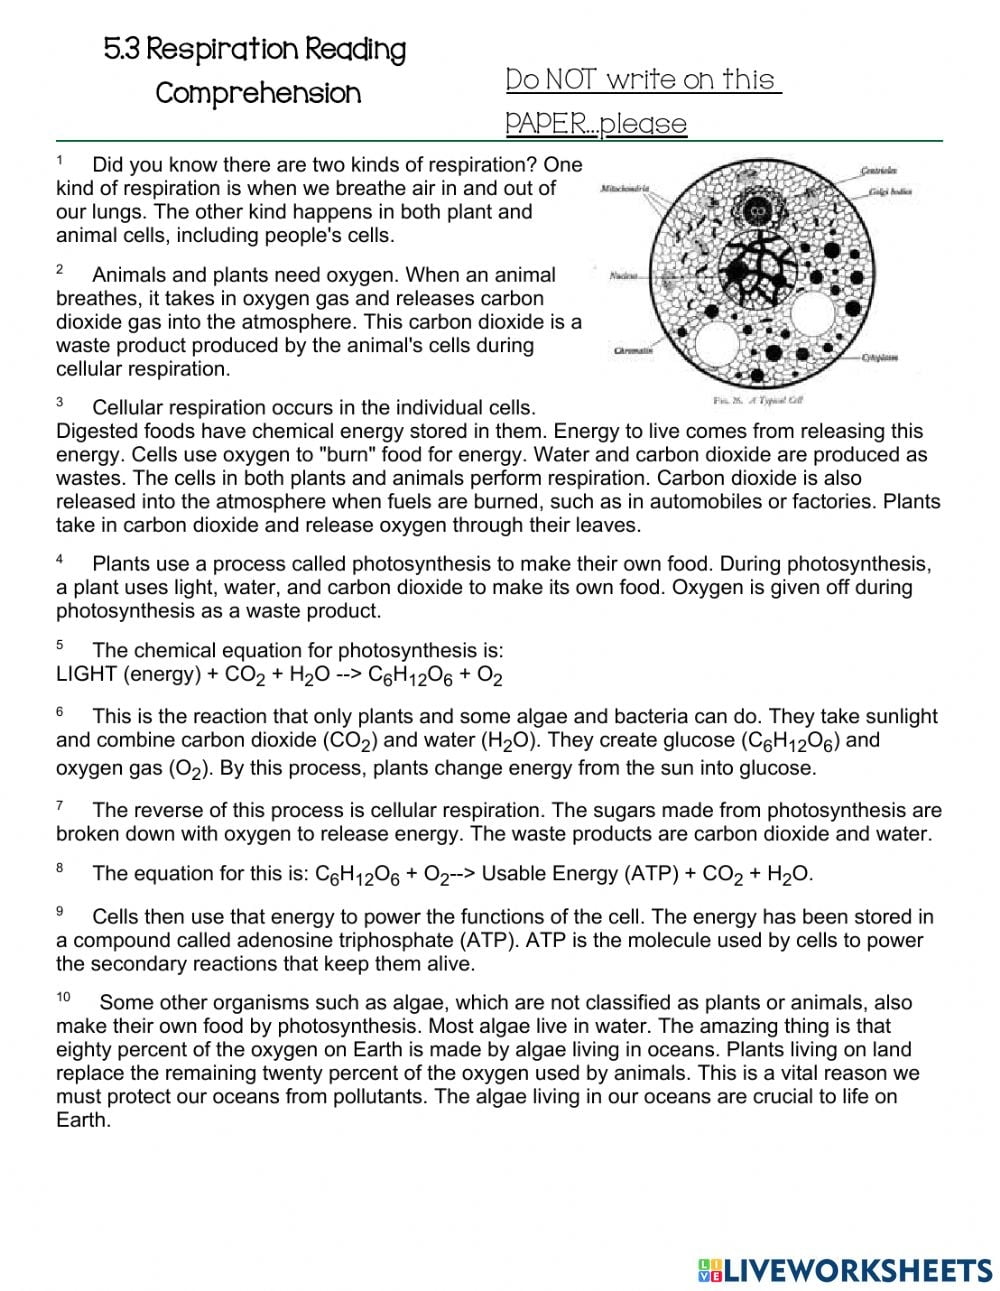 Plant And Animal Cells Reading Comprehension Worksheets Pdf